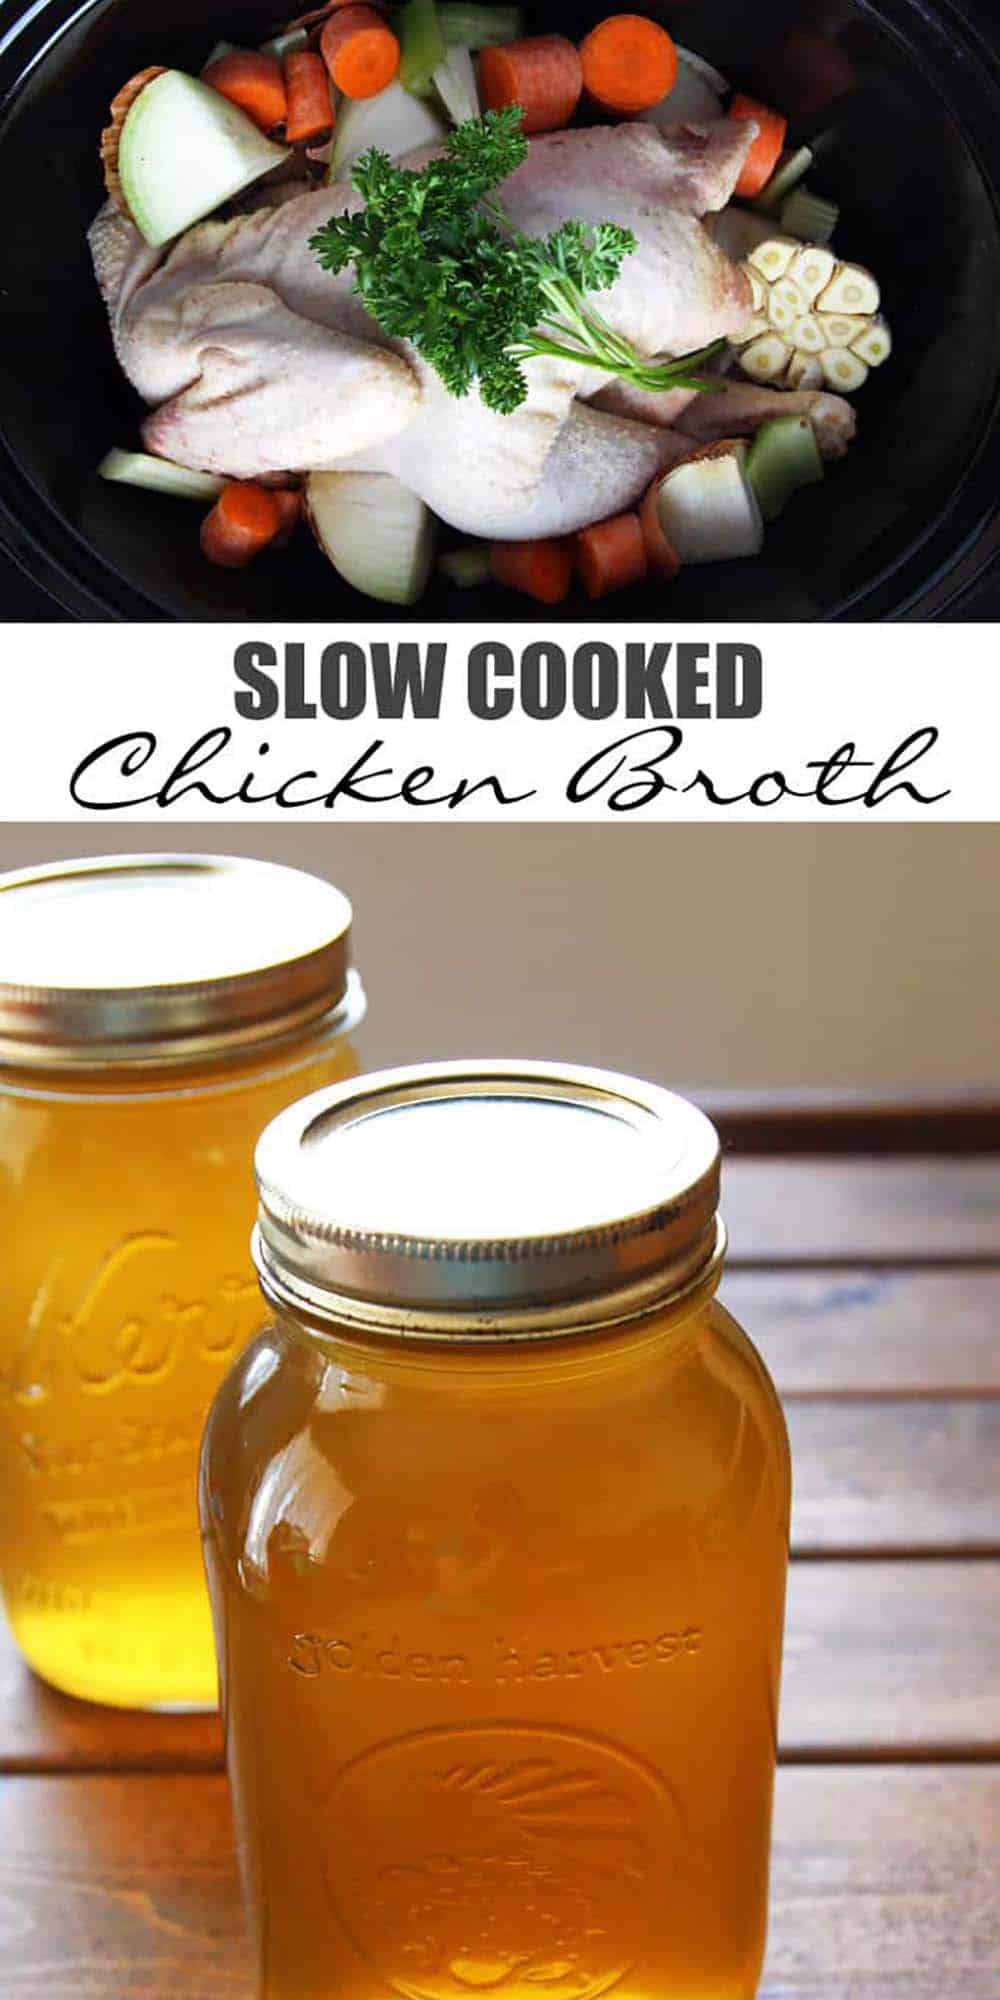 Slow Cooked Chicken Broth